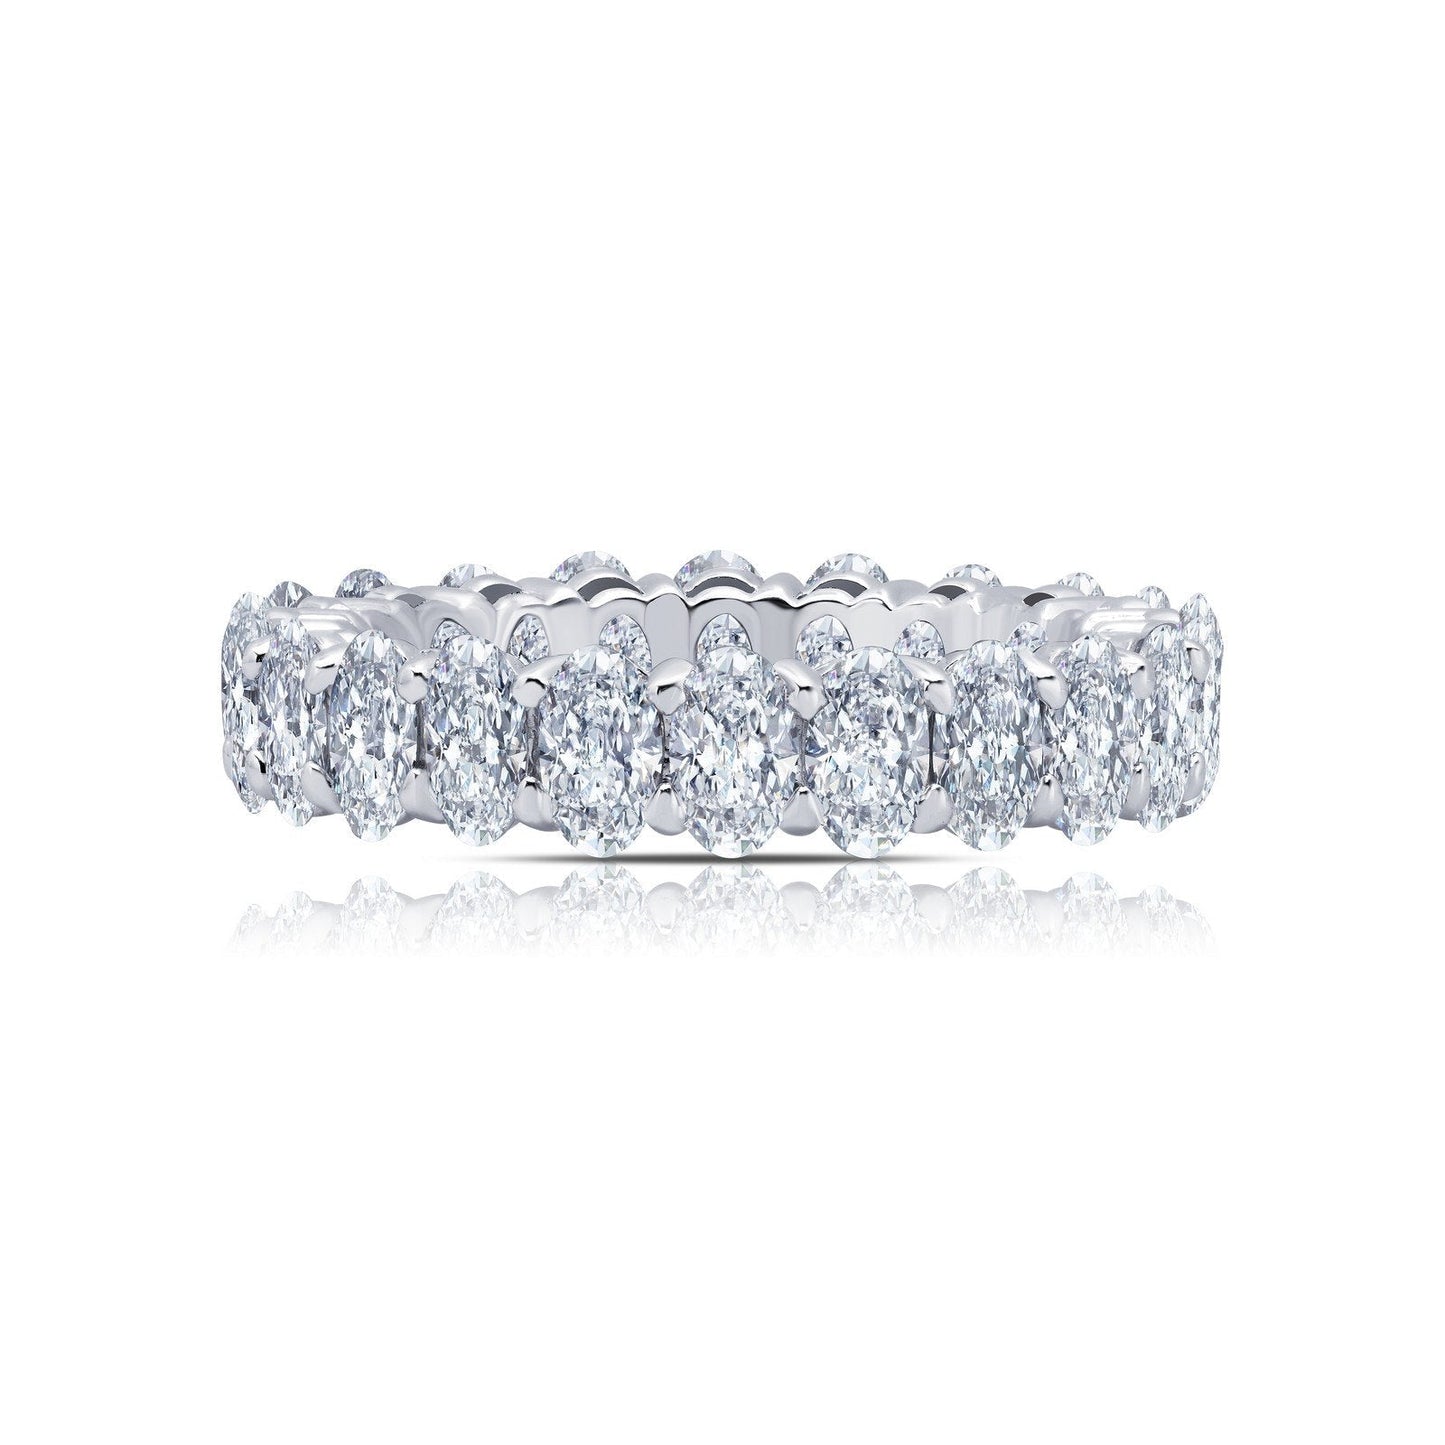 Lafonn 4.62 CTW Anniversary Eternity Band Simulated Diamond RINGS Size 5 Platinum 4.62 CTS Approx. 5mm (W)